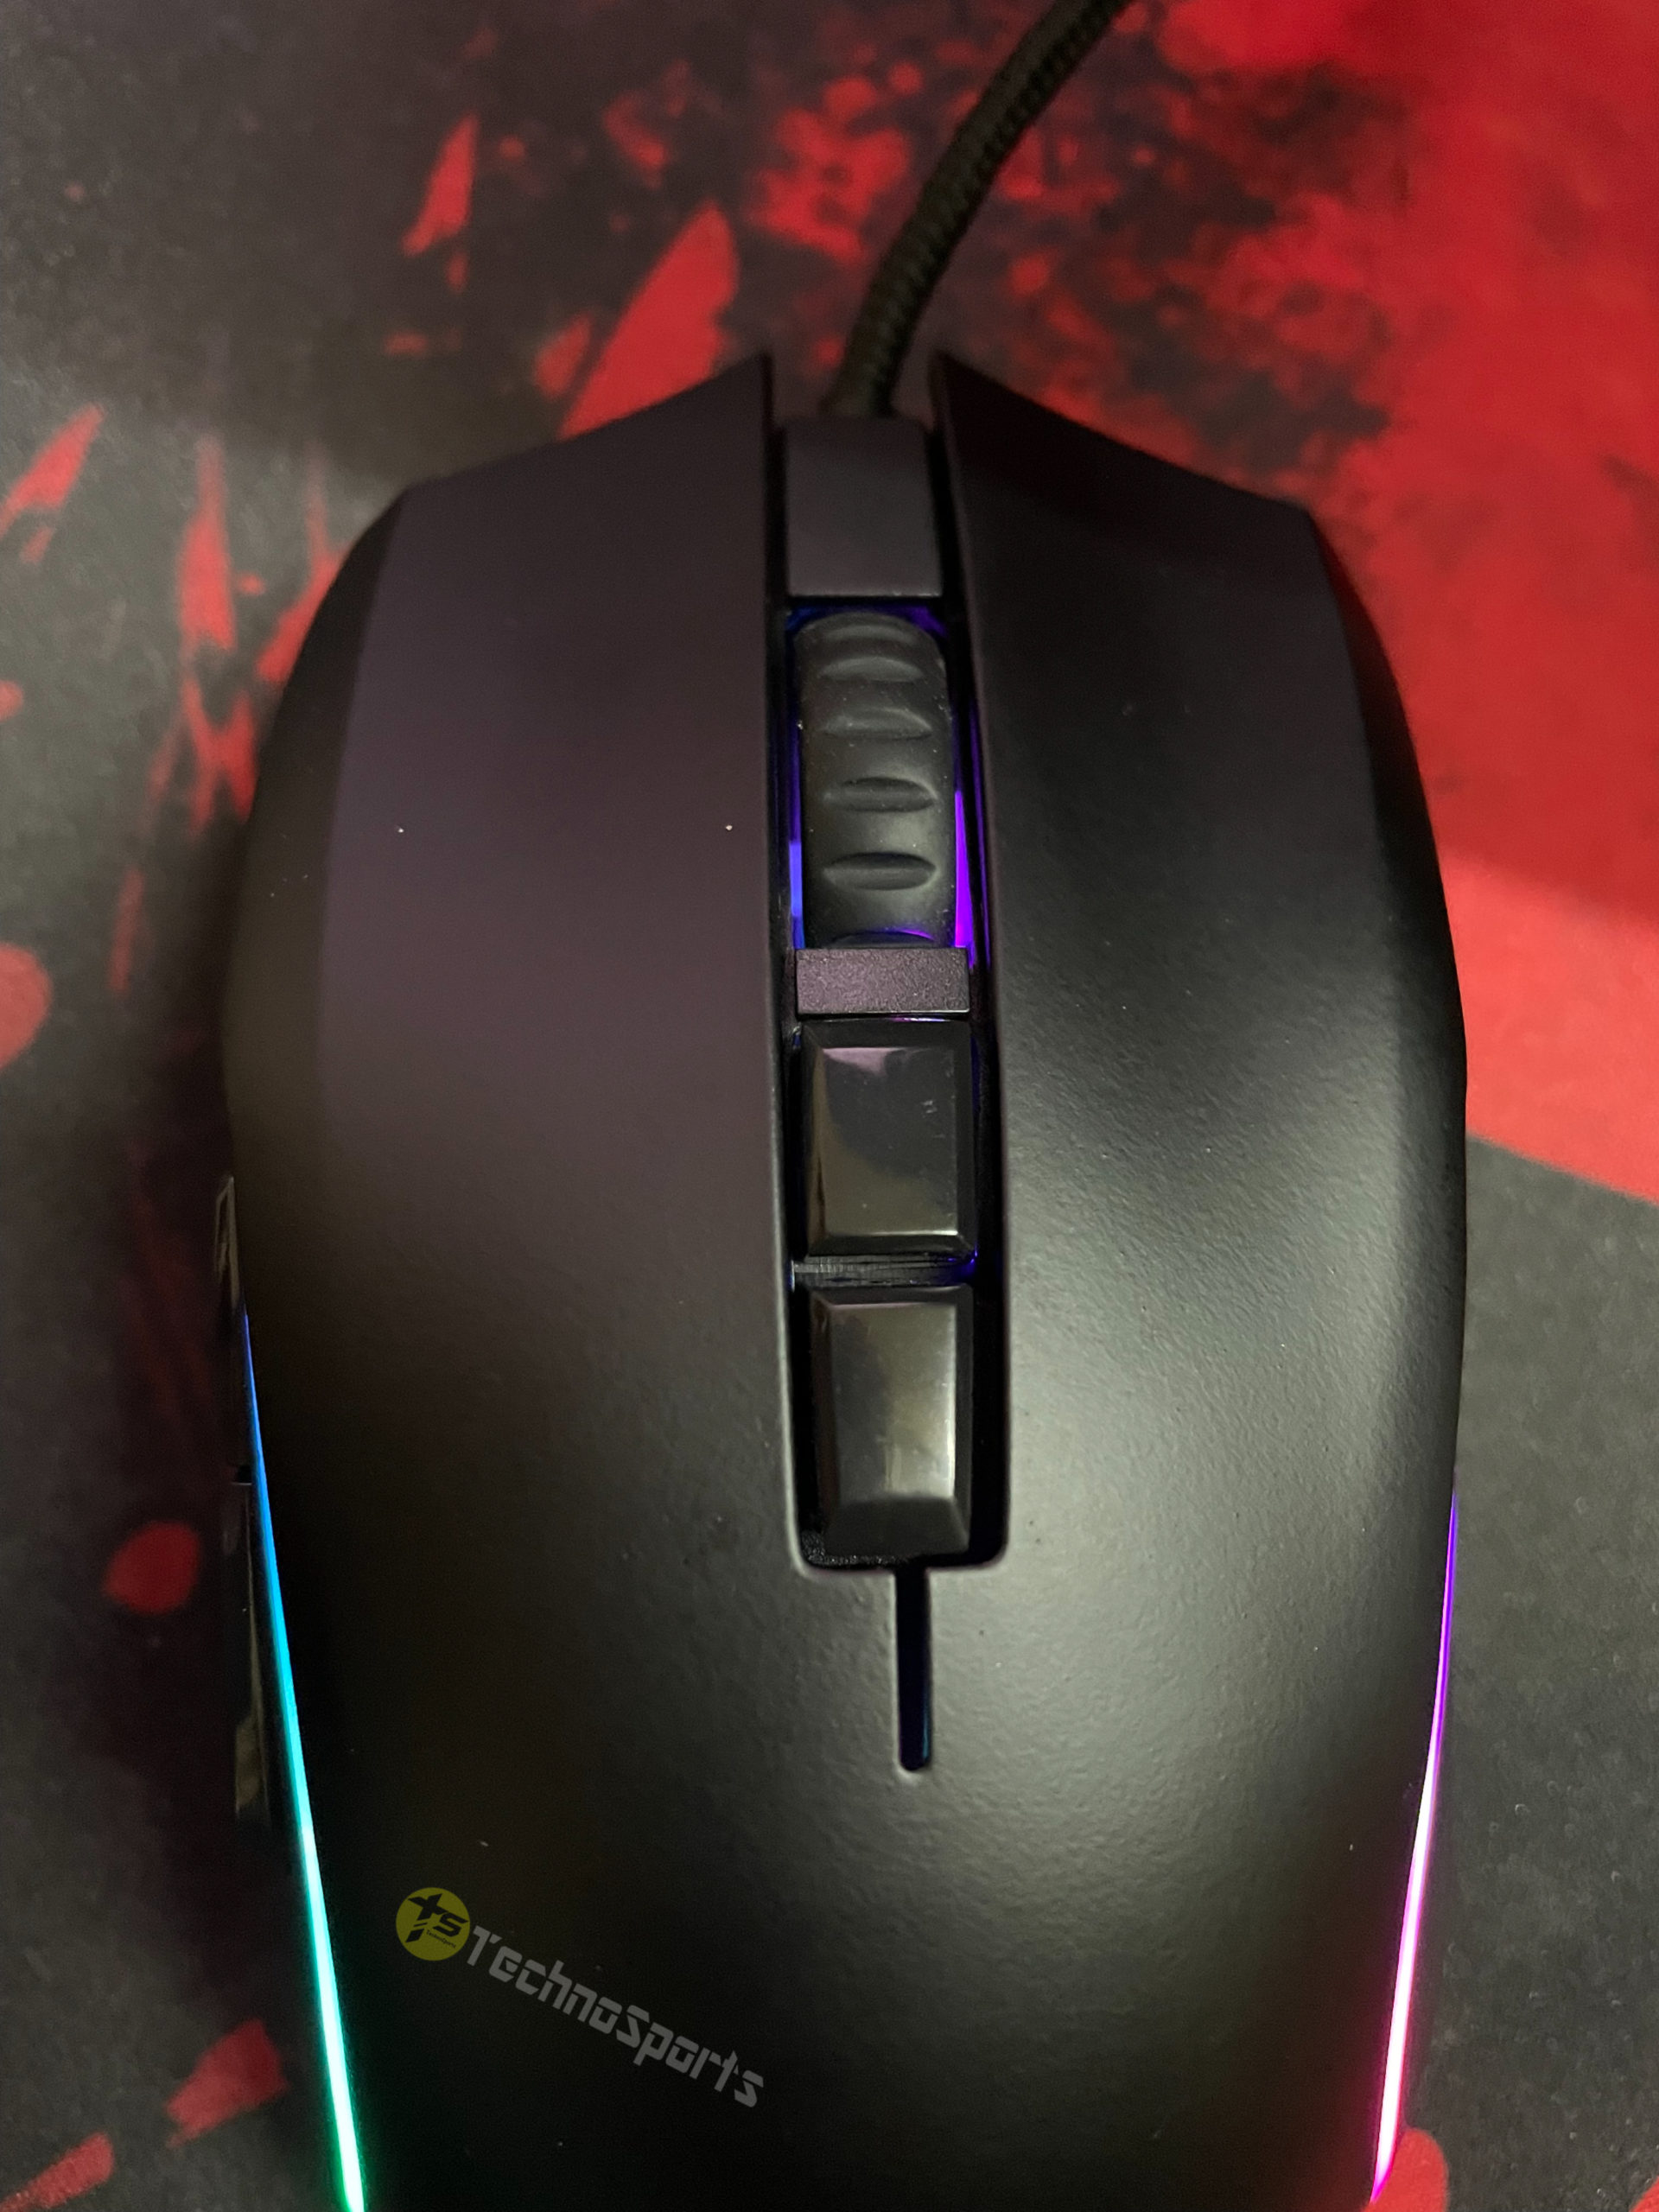 gamingmouse10new scaled Amkette EvoFox Phantom Pro Gaming Mouse review: Absolutely worth it for just Rs 799